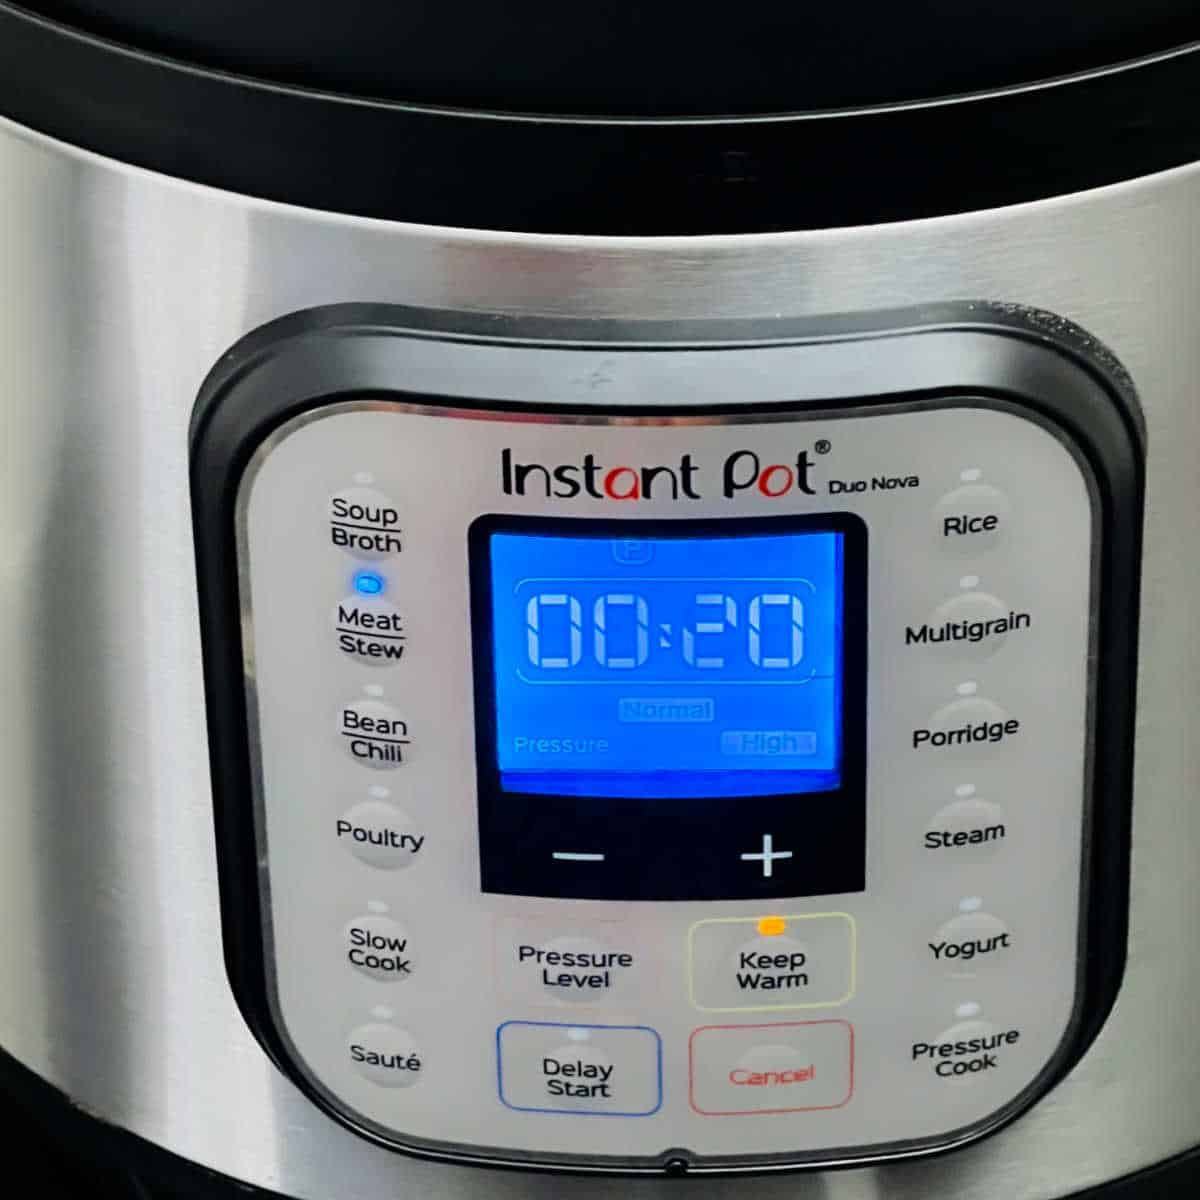 Step showing the Instant Pot cooking time.